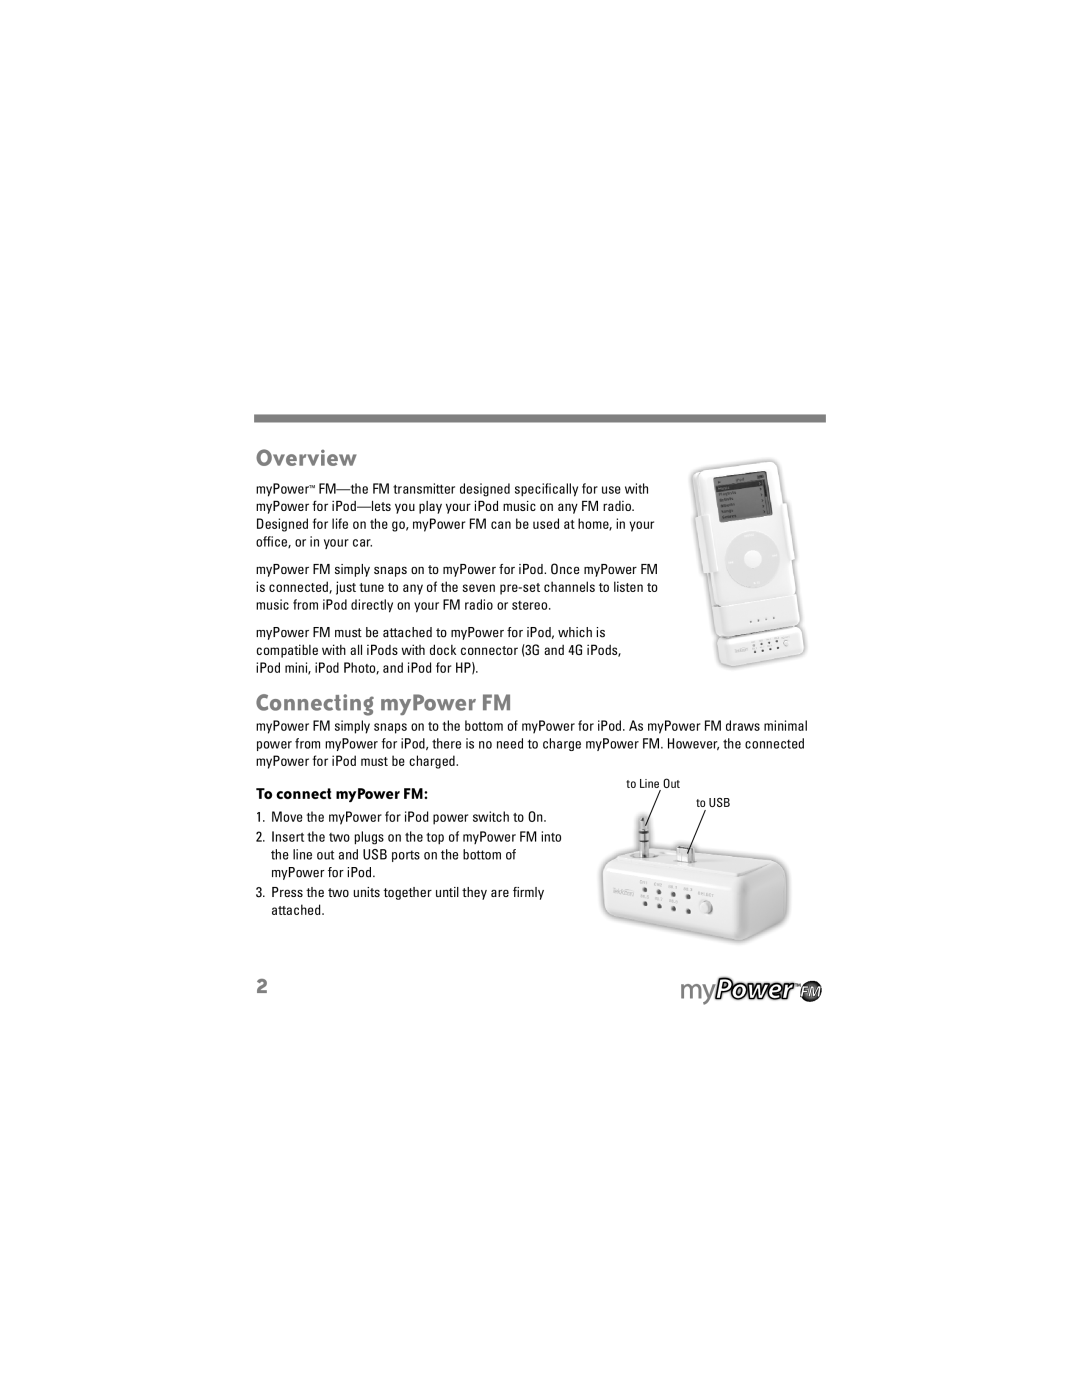 Tekkeon MP1100-50 manual Overview, Connecting myPower FM, To connect myPower FM 